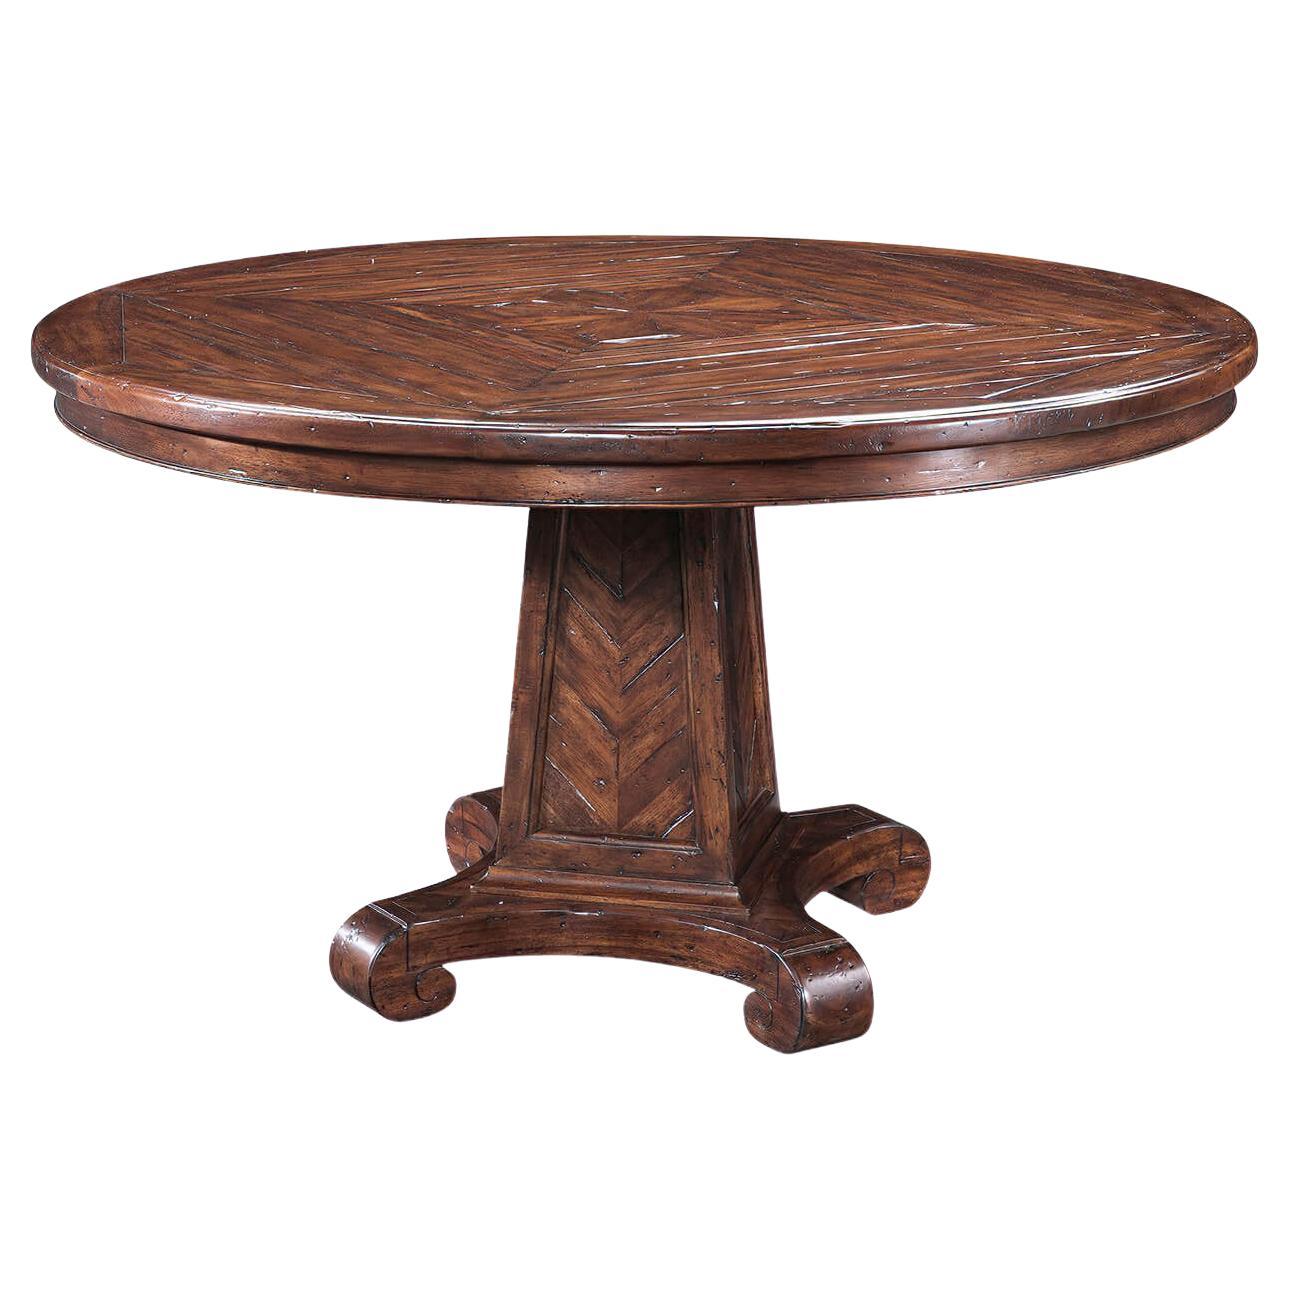 Rustic Round Dining Table For Sale